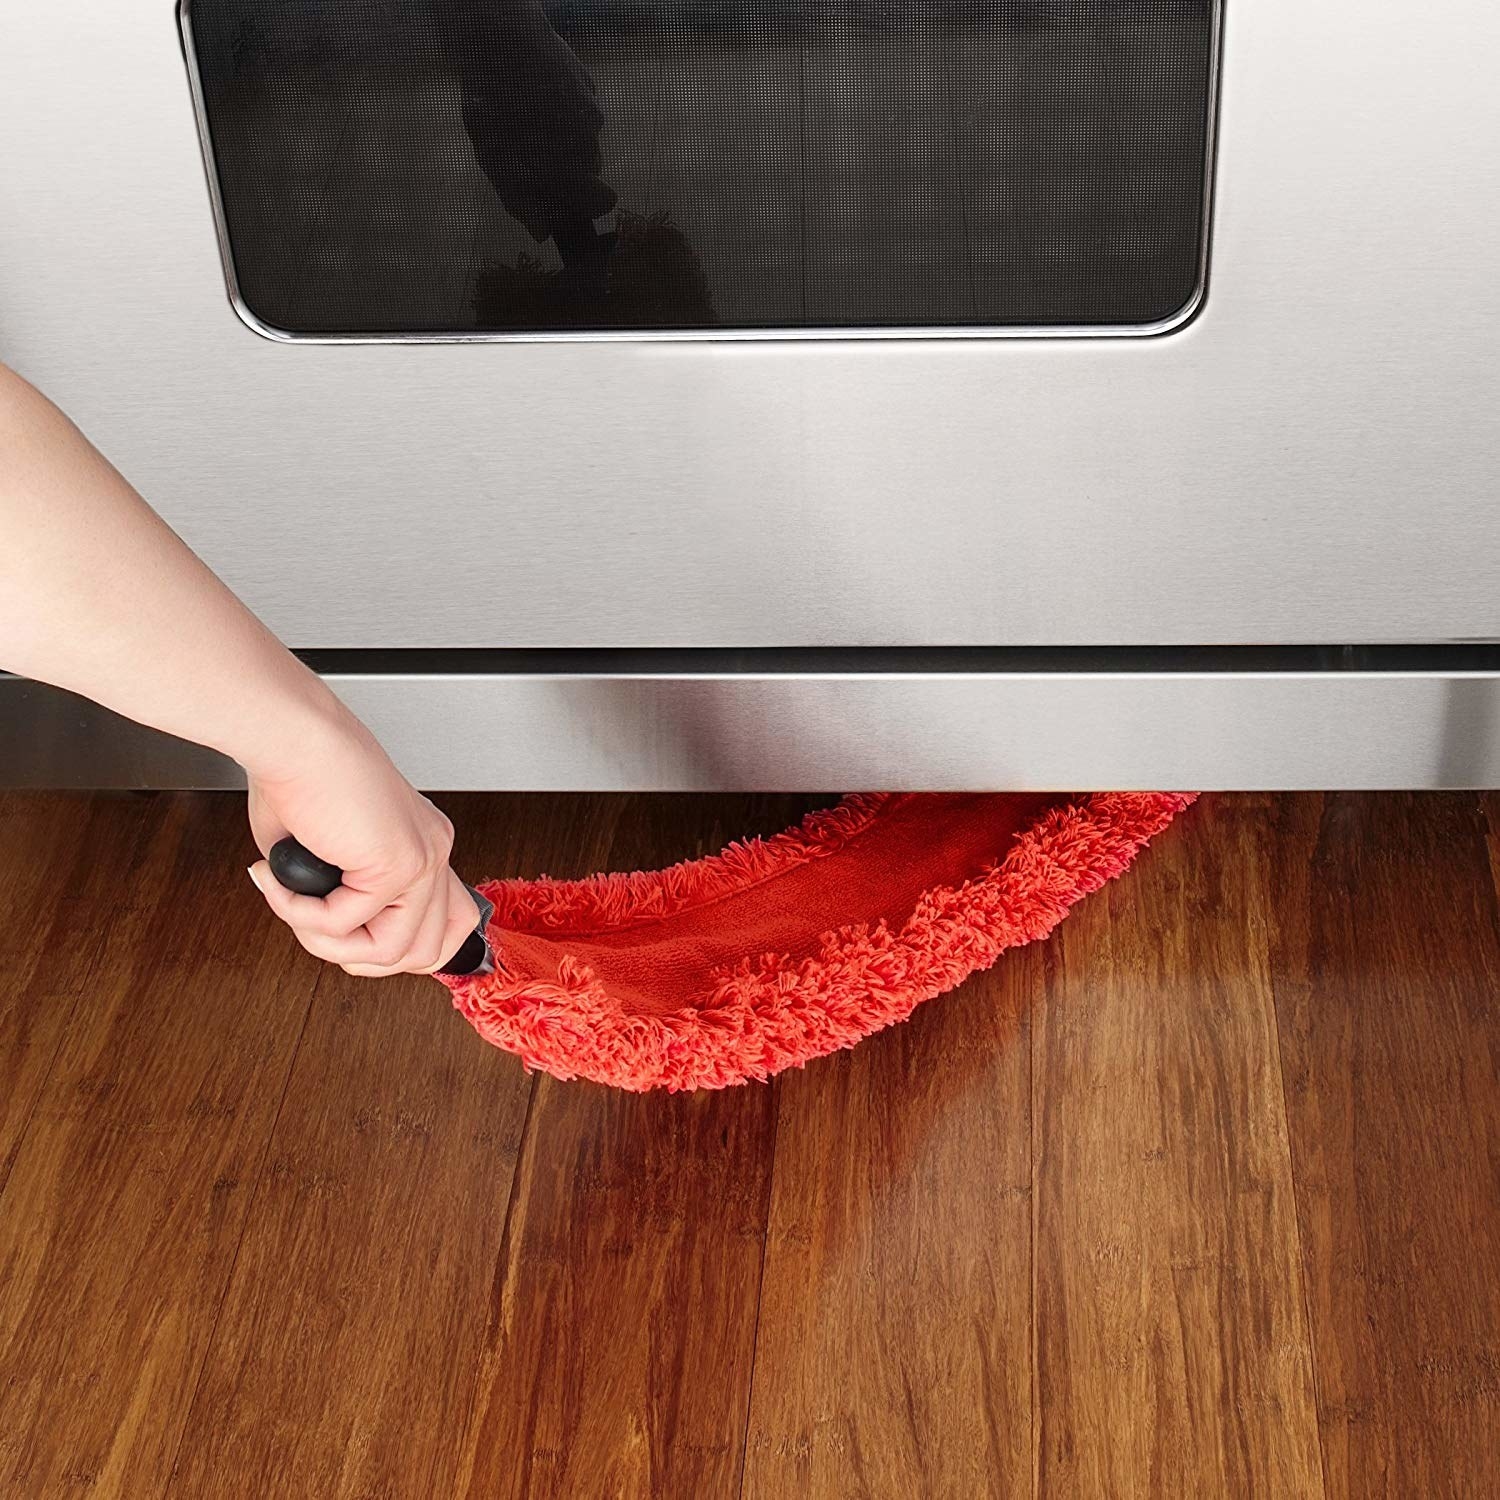 I Swear by This $17 Duster That Cleans Under Appliances